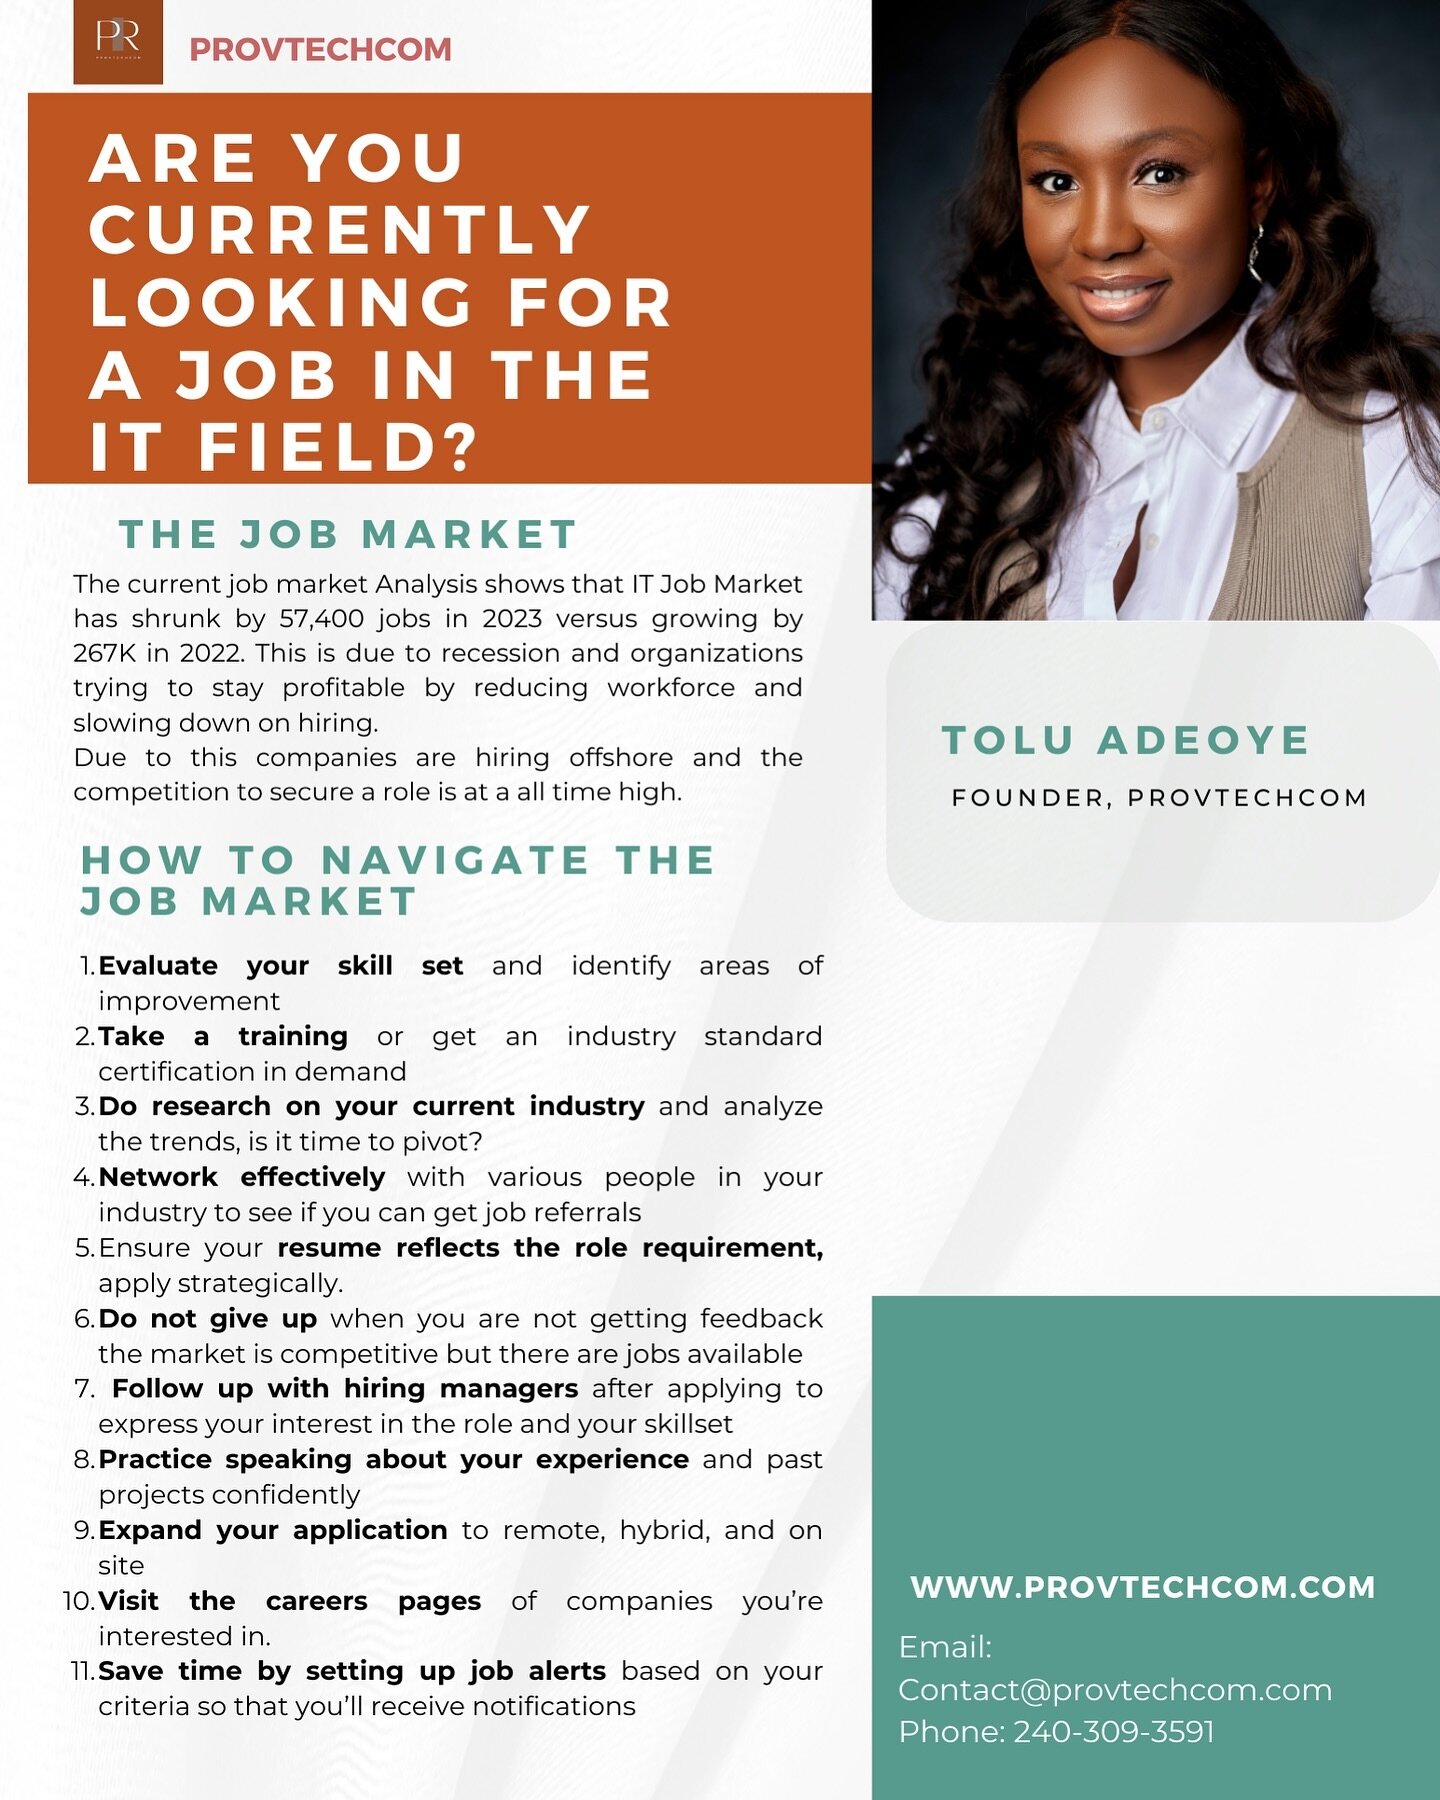 The IT job market has changed and we thought to share some tips to navigate it.

#businessanalyst  #BAtraining  #businessanalysts #tech #techjobs #careerdevelopment #careerchange #techtraining #ittraining #agilecoach #agiletraining #interviewprep #jo